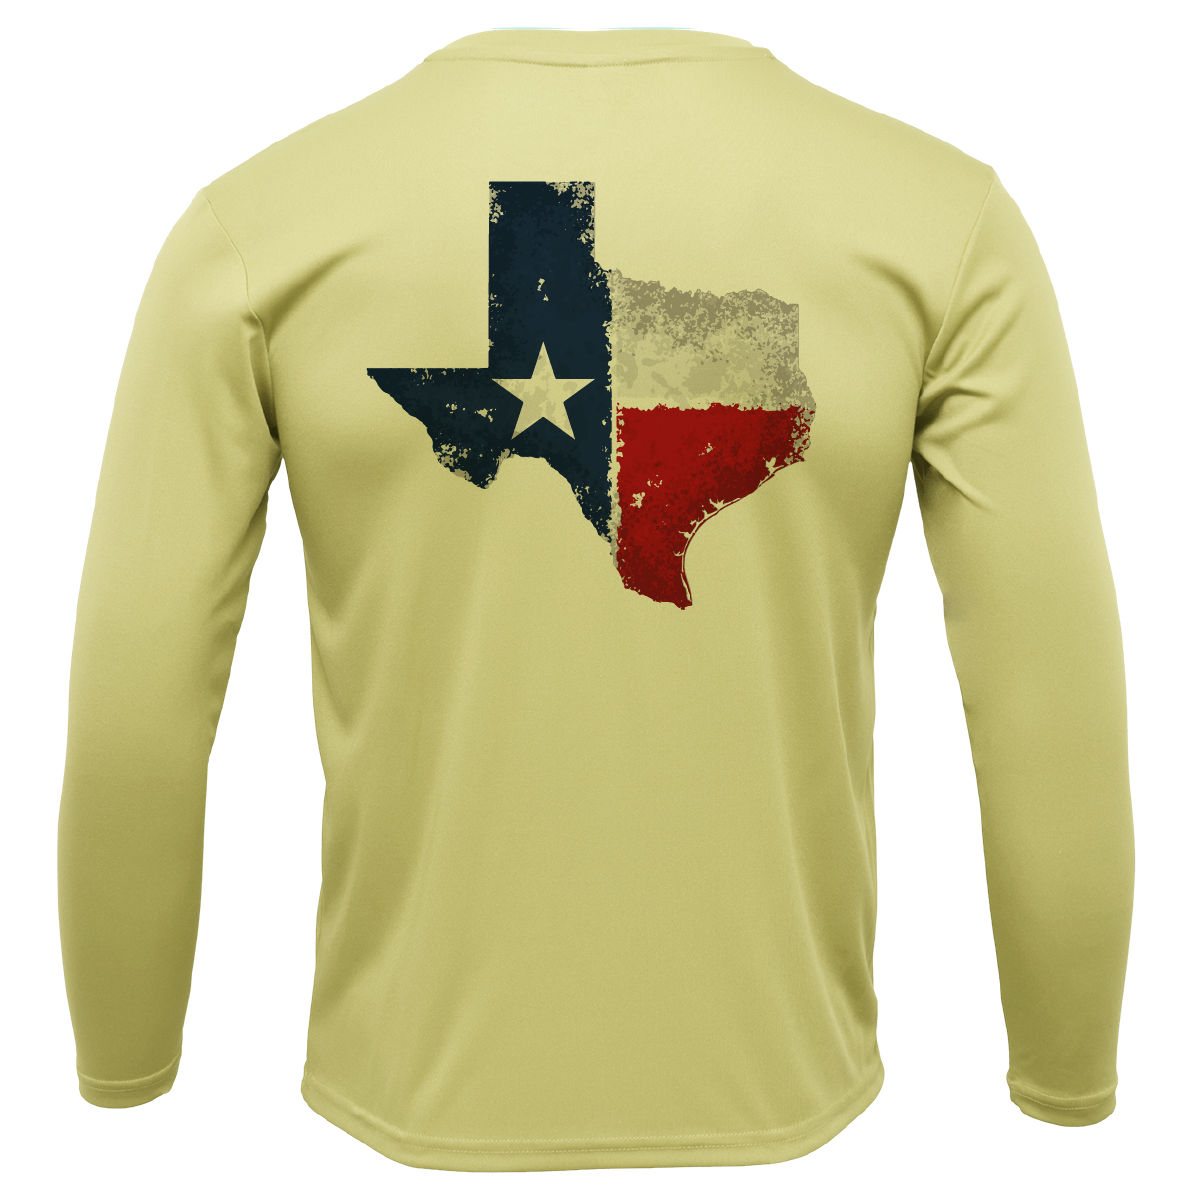 State of Texas Long Sleeve UPF 50+ Dry-Fit Shirt